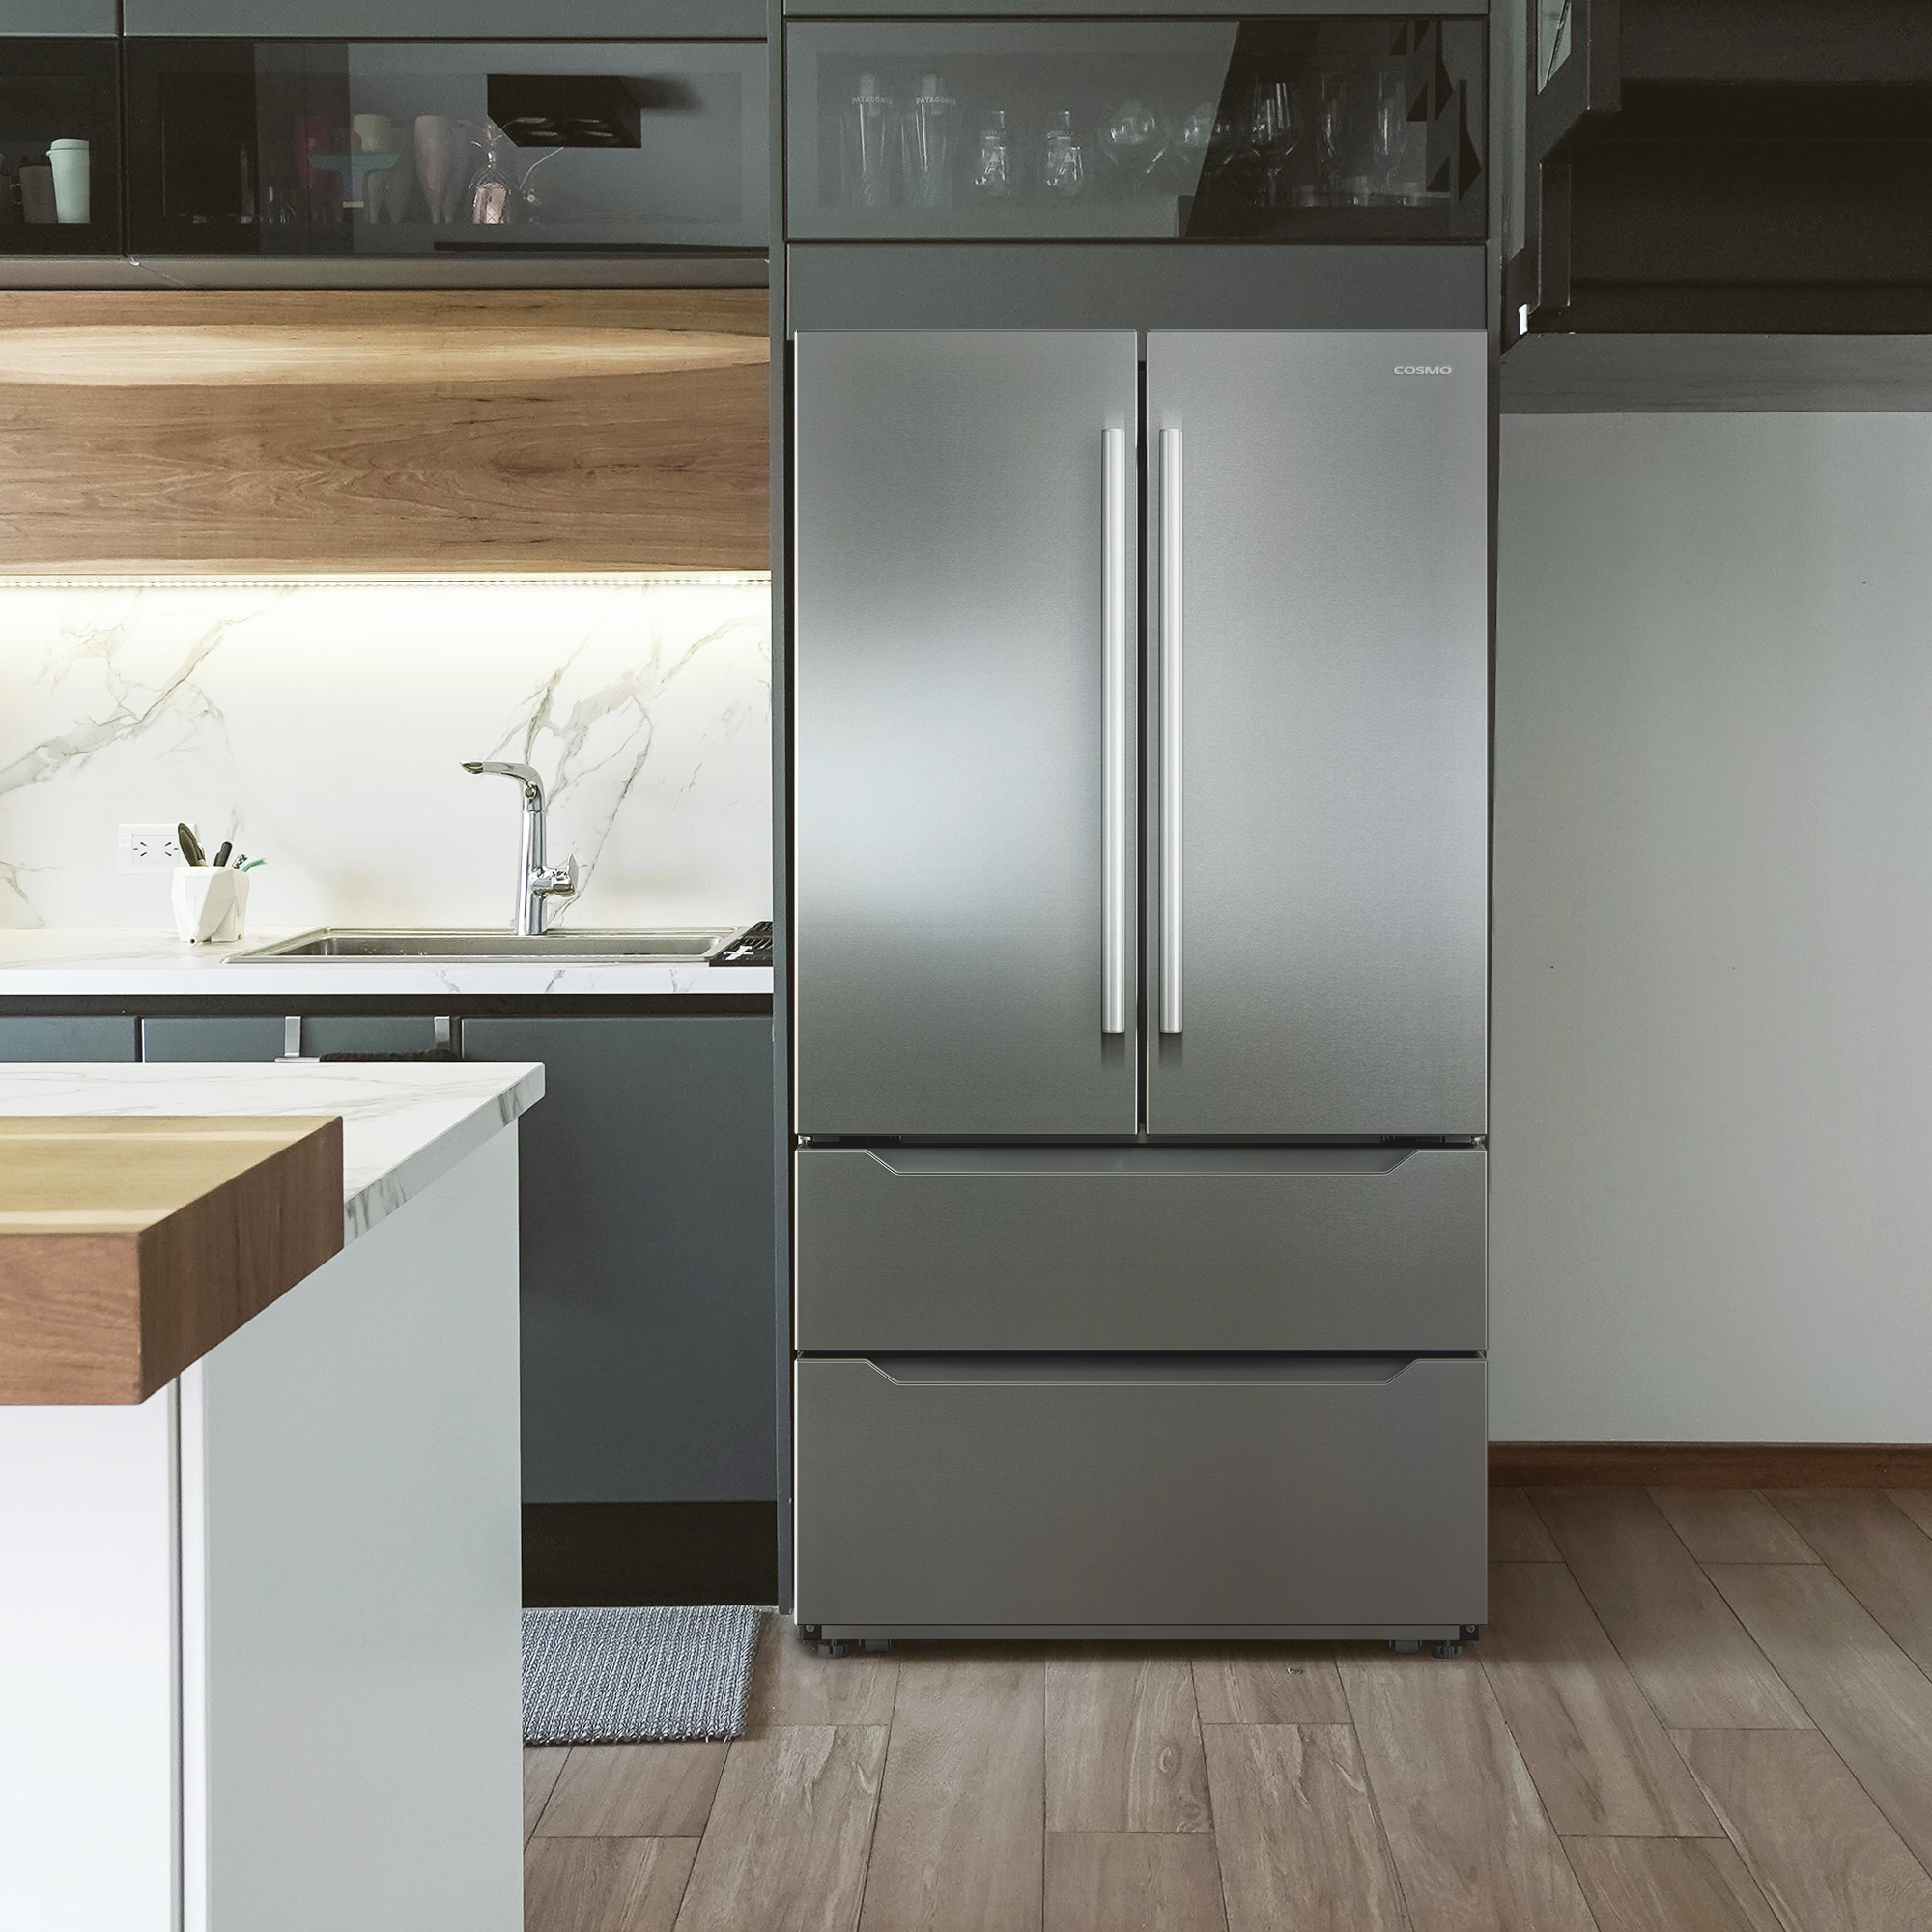 The Pros and Cons of Counter Depth Appliances